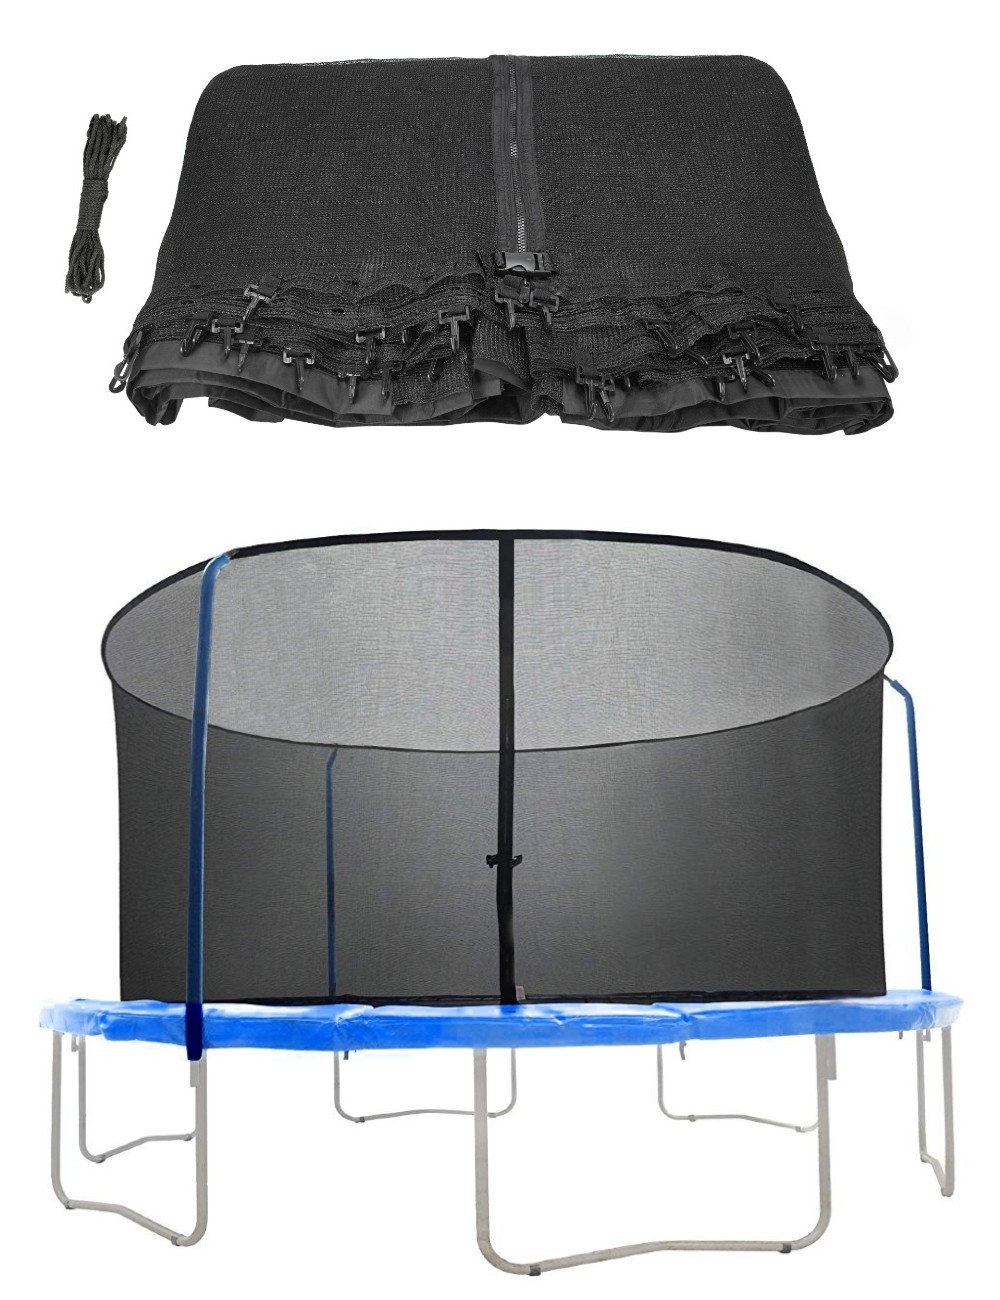 Trampoline Replacement Enclosure Safety Net for 8 ft. Round Frames using 3 Bent Poles and Top Ring - Net Only